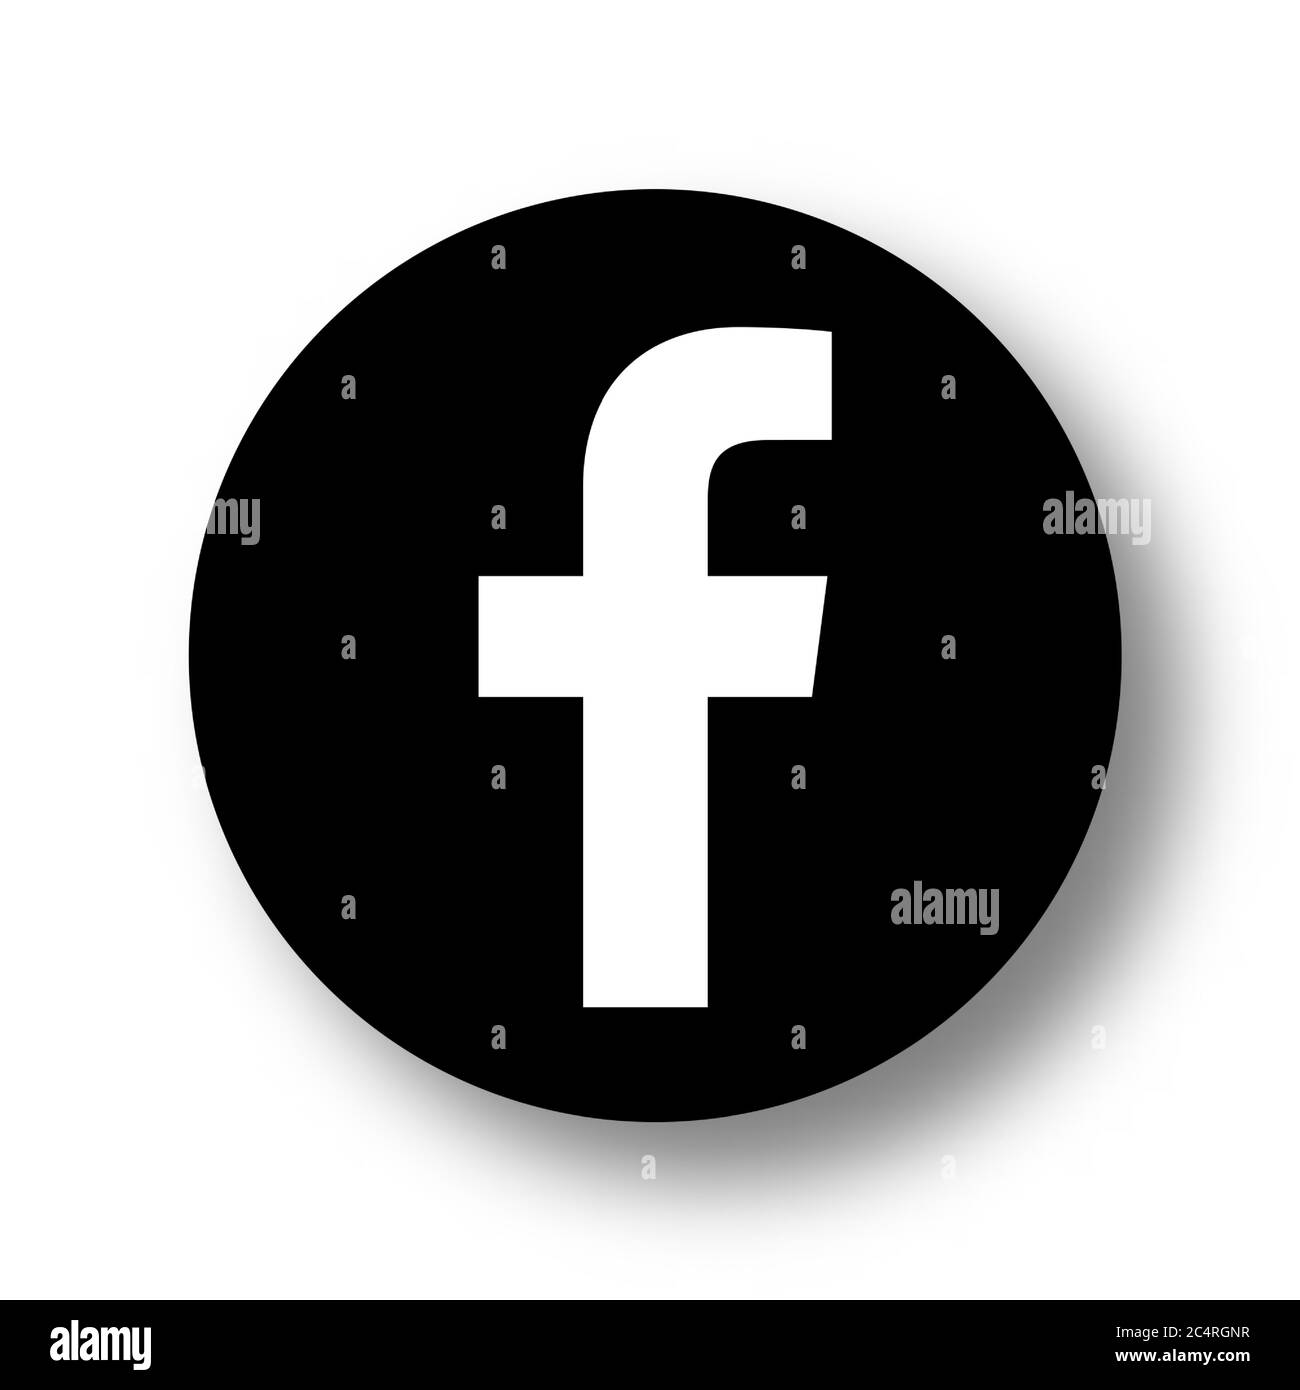 VORONEZH, RUSSIA - JANUARY 31, 2020: Facebook logo black round icon with soft shadow Stock Vector